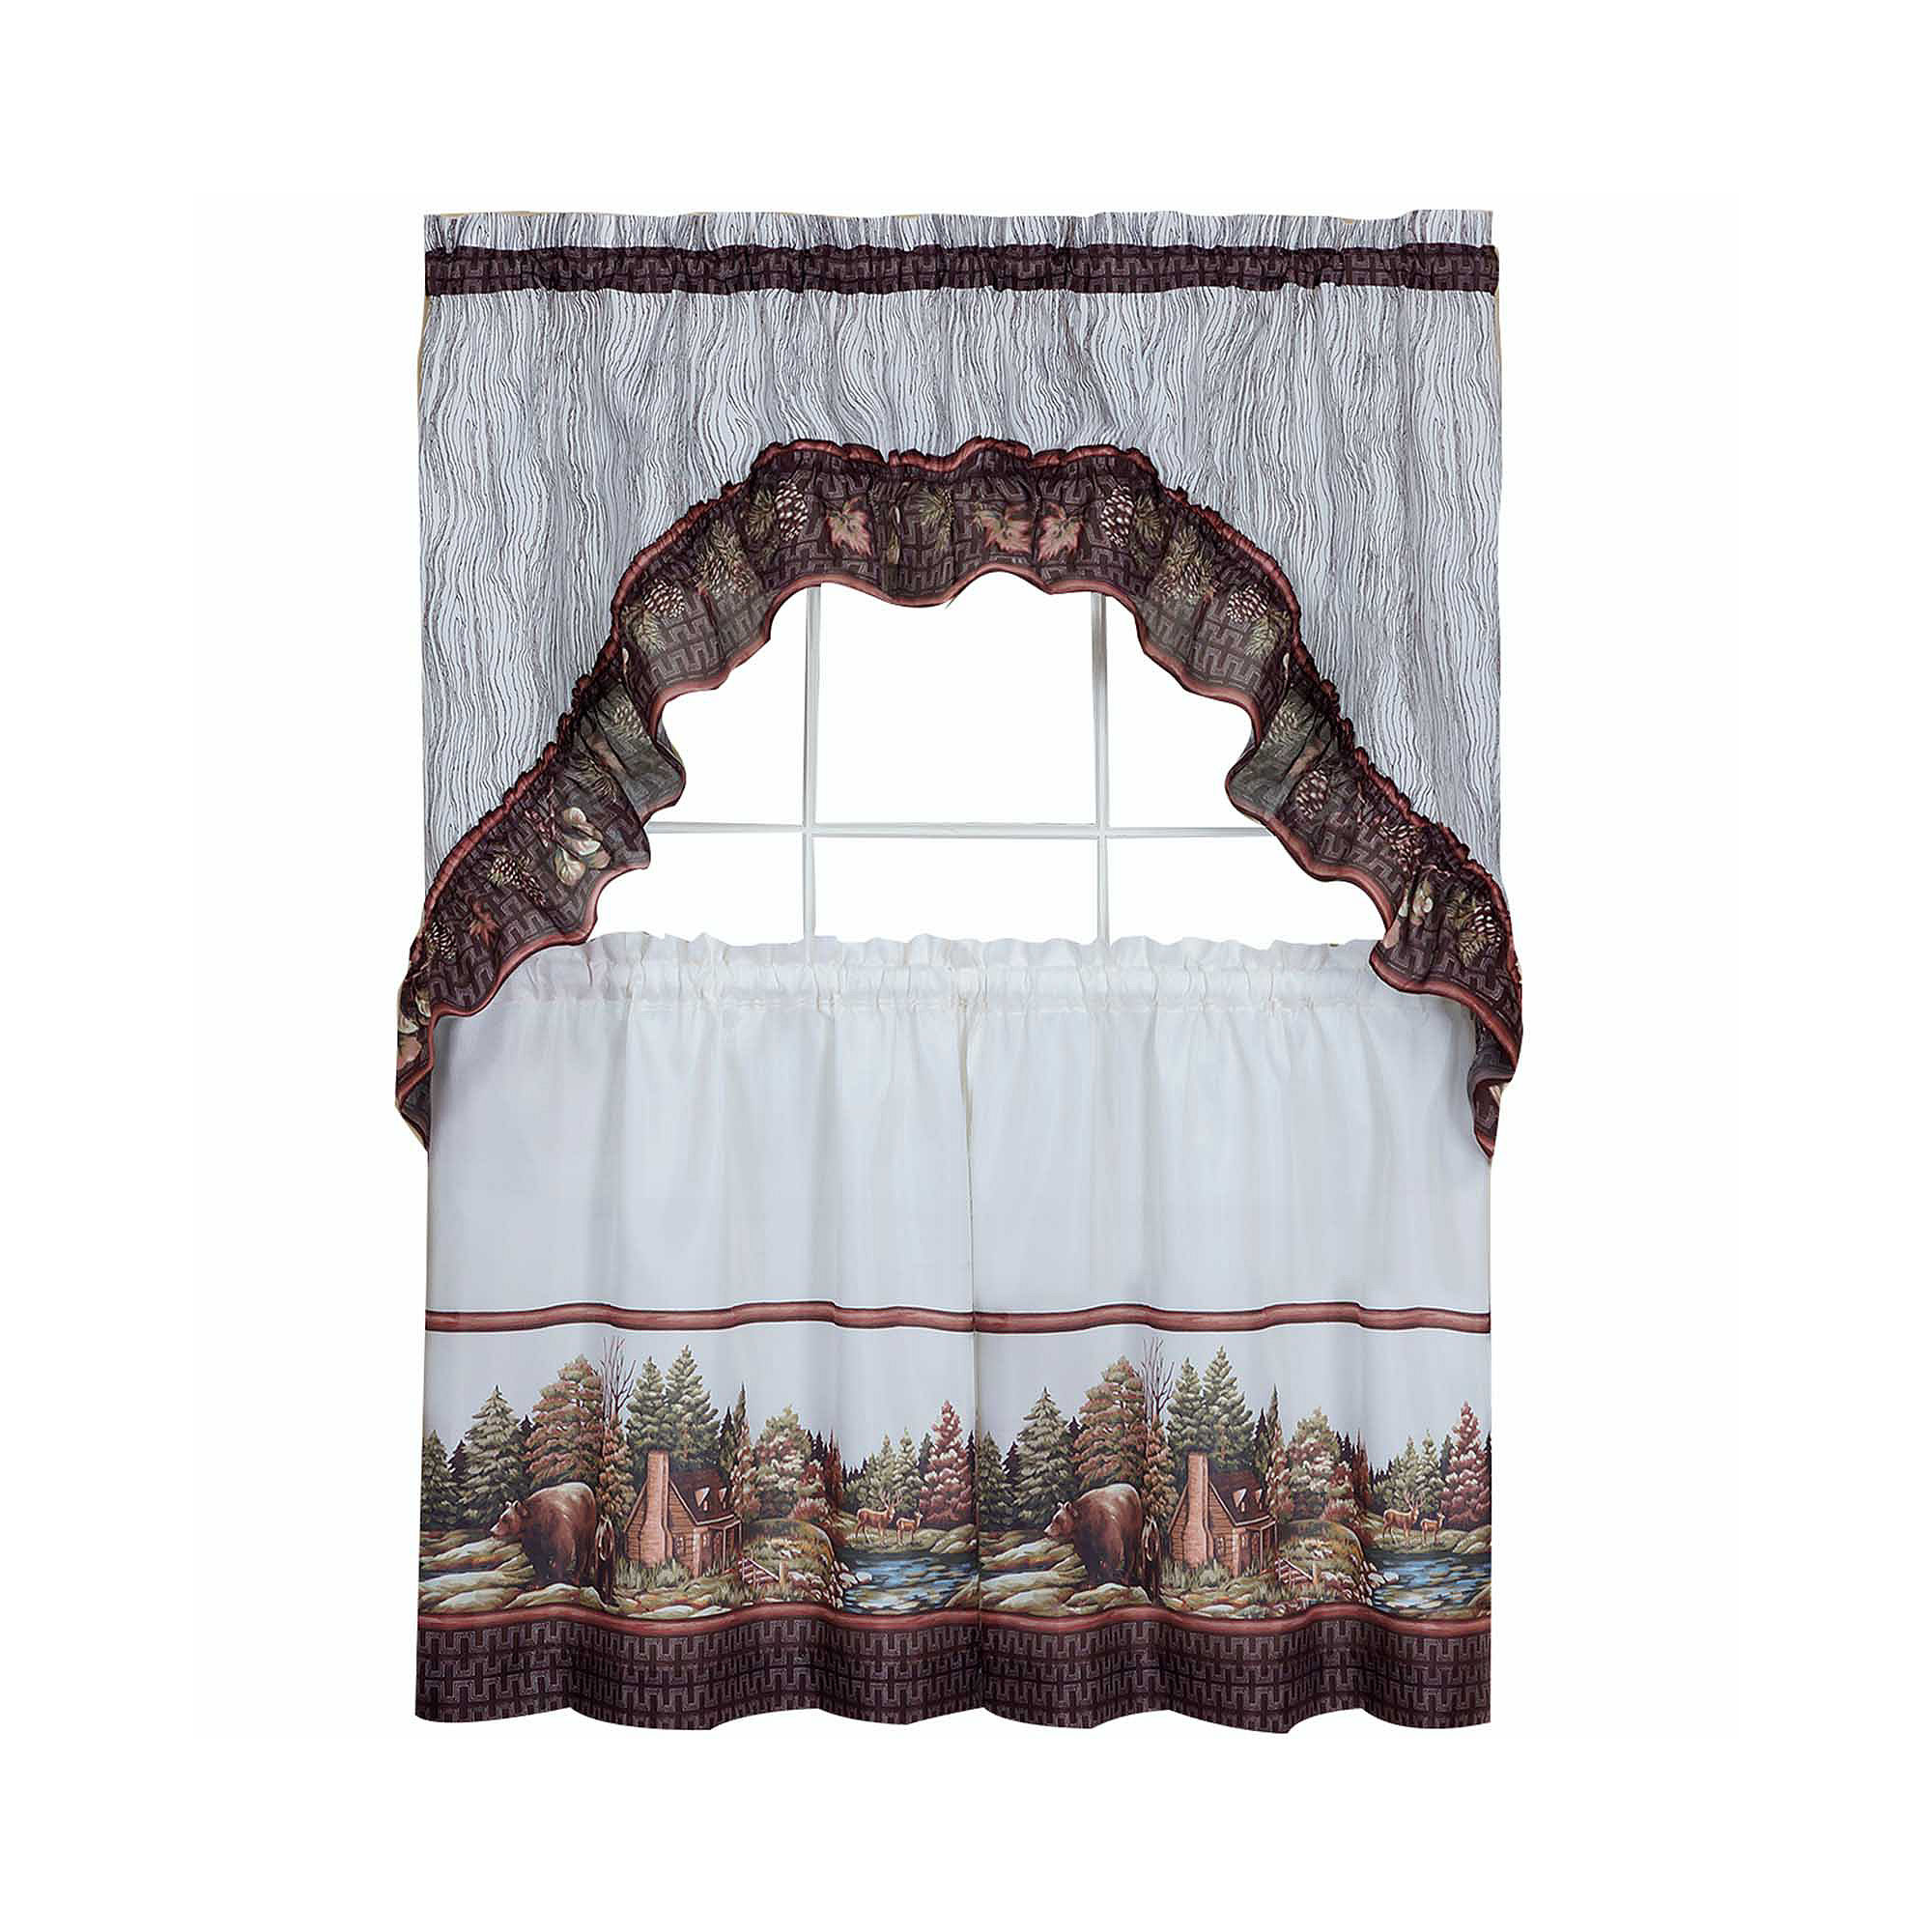 Woodlands Window Tier and Ruffled Swag Valance Set